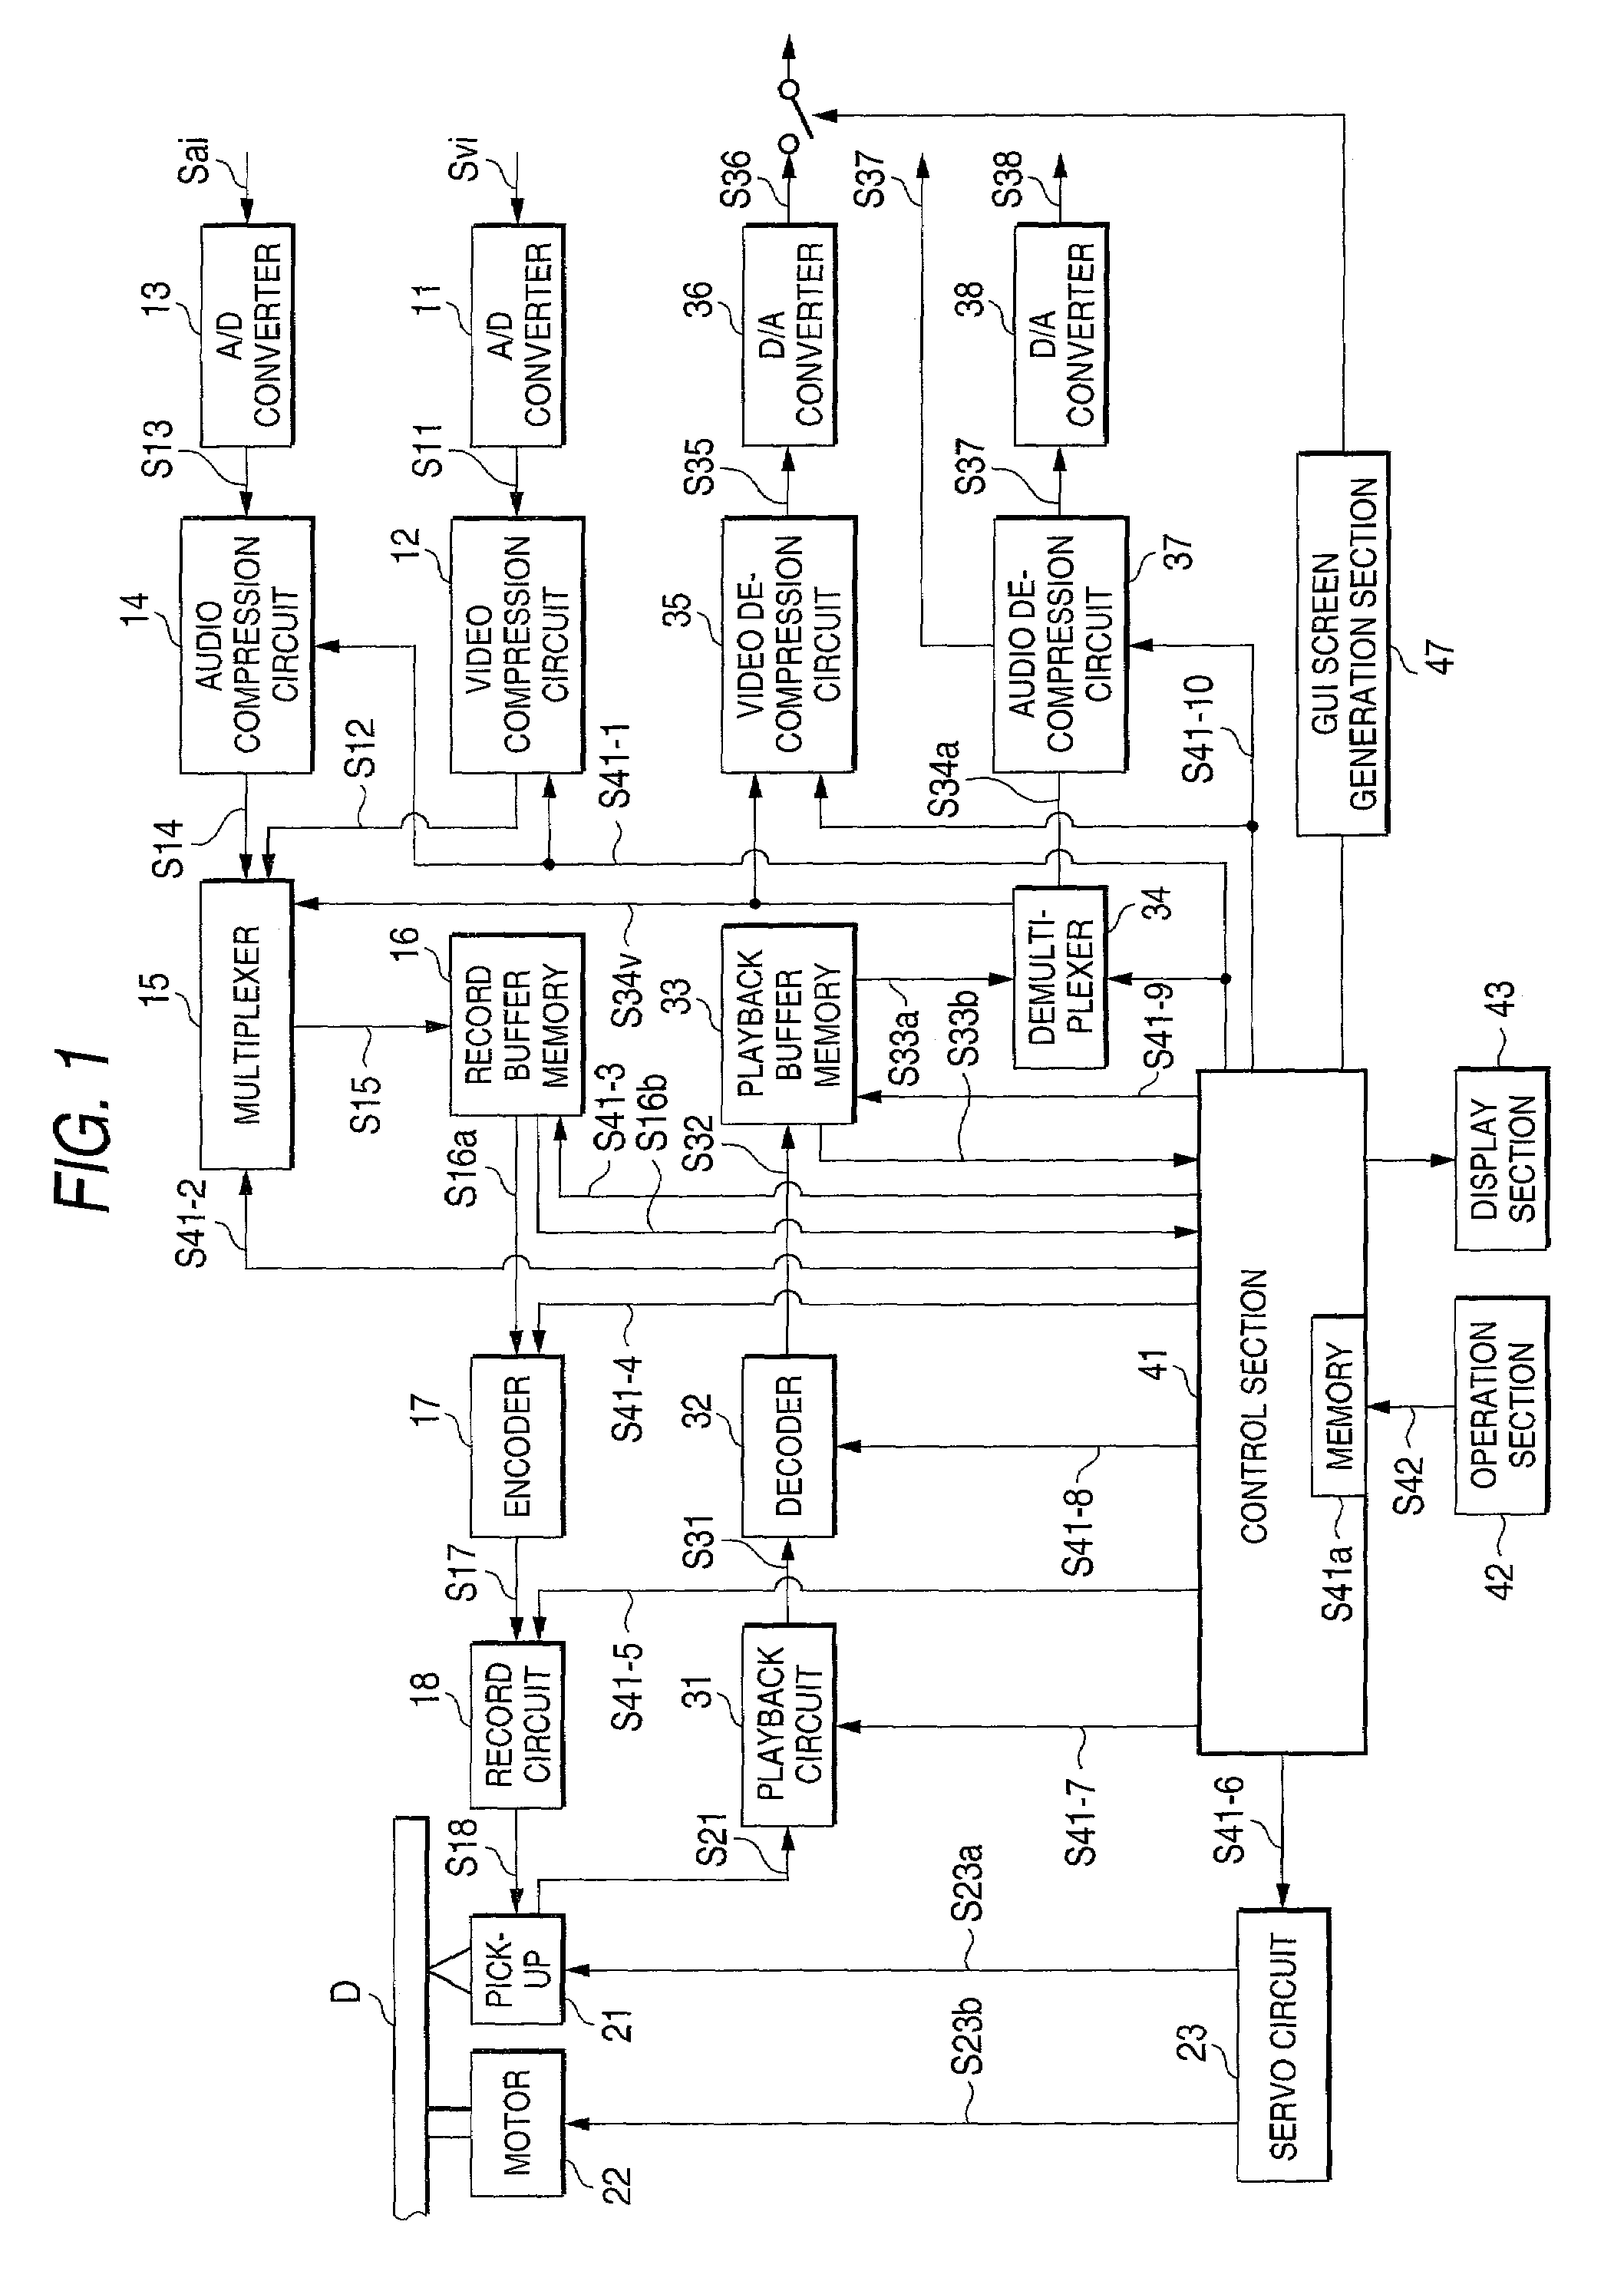 Information record and playback apparatus and computer program having a resume function based on recorded playback stop position information